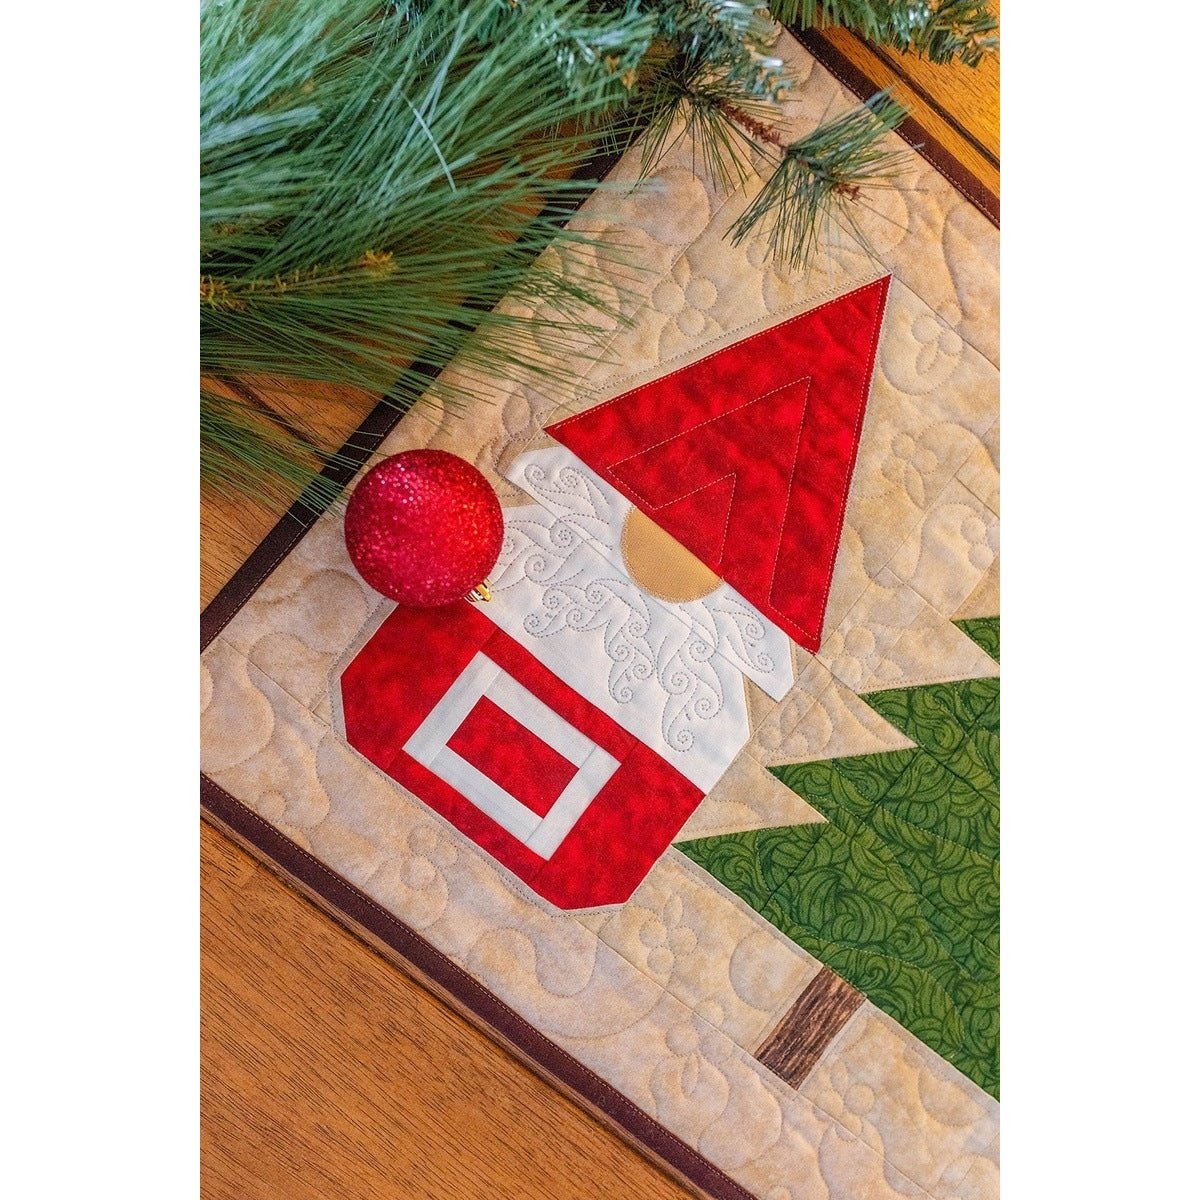 Festive Gnomes & Trees Quilted Table Runner Kit - Pre-Cut, Complete with Fabric, Pattern, & Backing - 16x62 inches